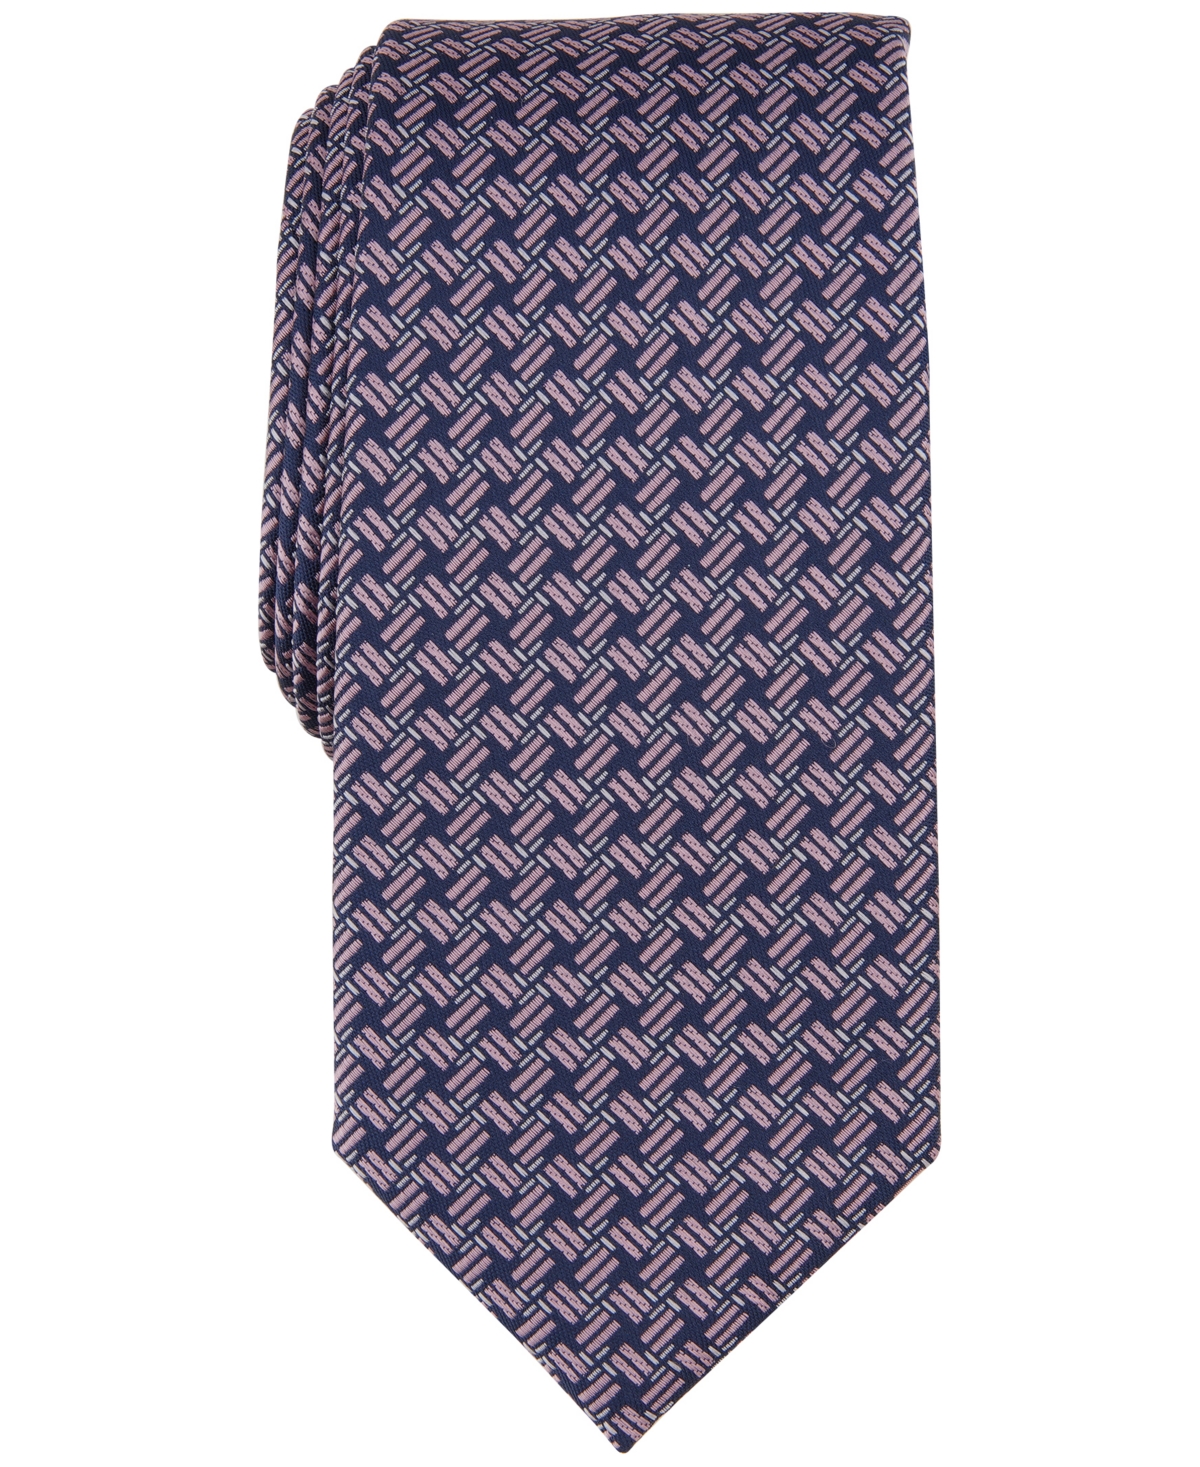 Men's Tolbert Patterned Tie, Created for Macy's - Silver